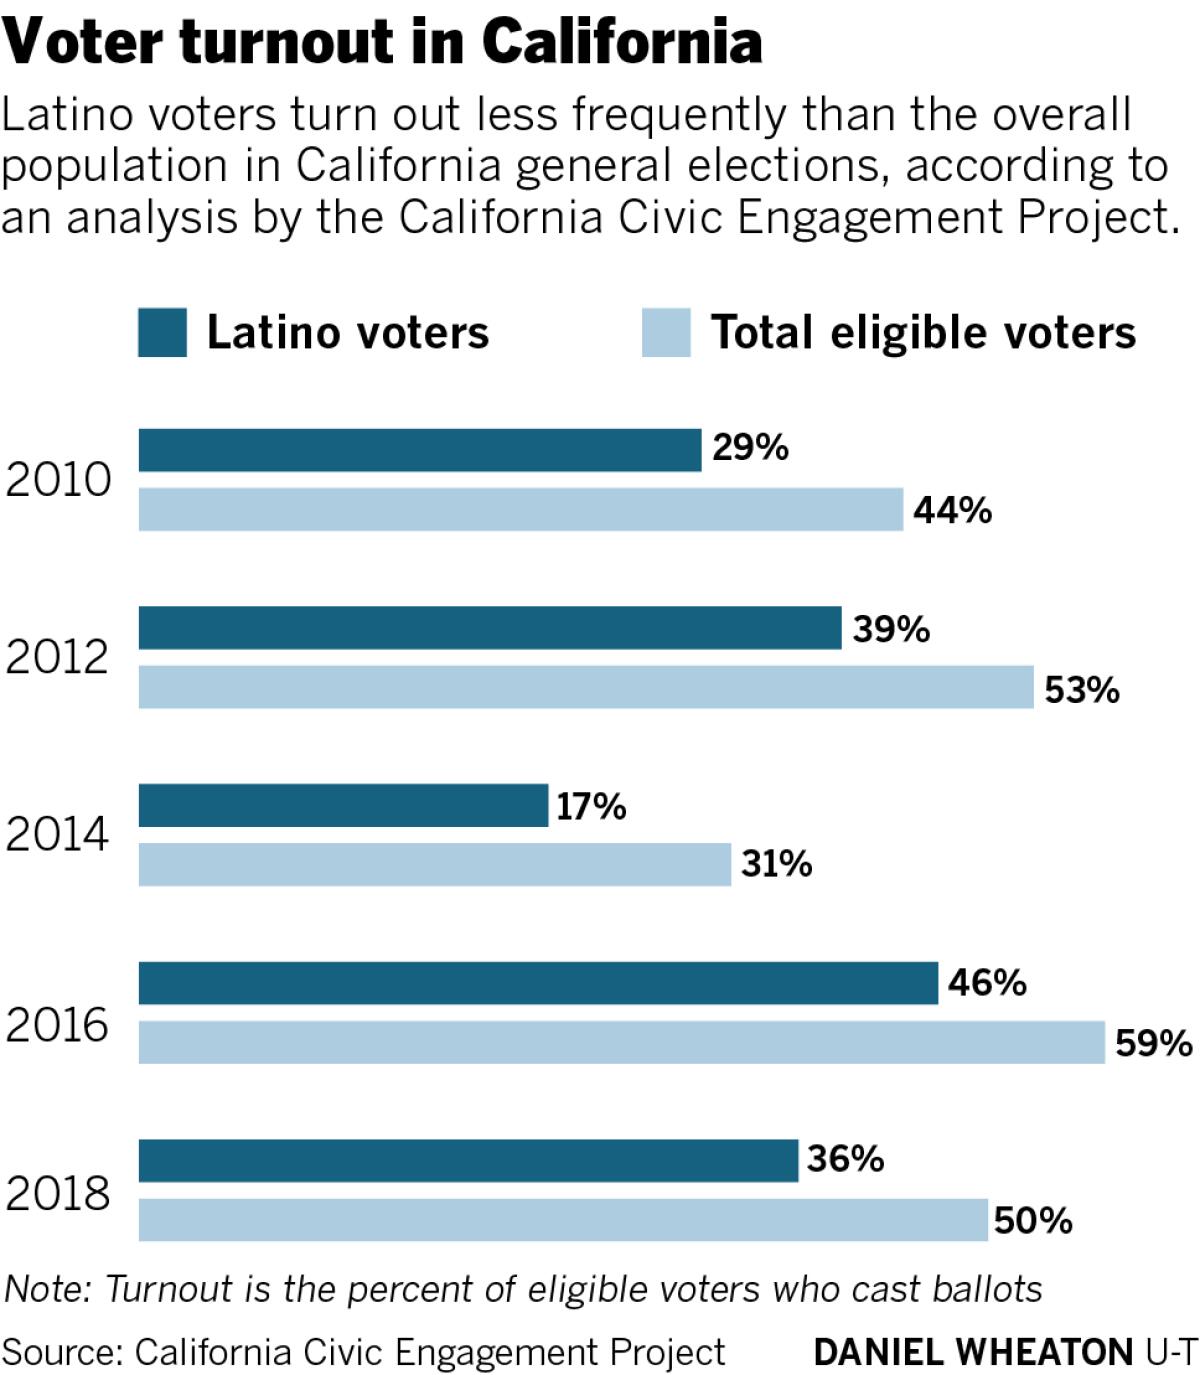 Election voter turnout
 
 Latino voters turn out less frequently than the general population in California elections, according to an analysis by the California Civic Engagement Project.
 
Note: Turnout is the percent of eligible voters who cast ballots.